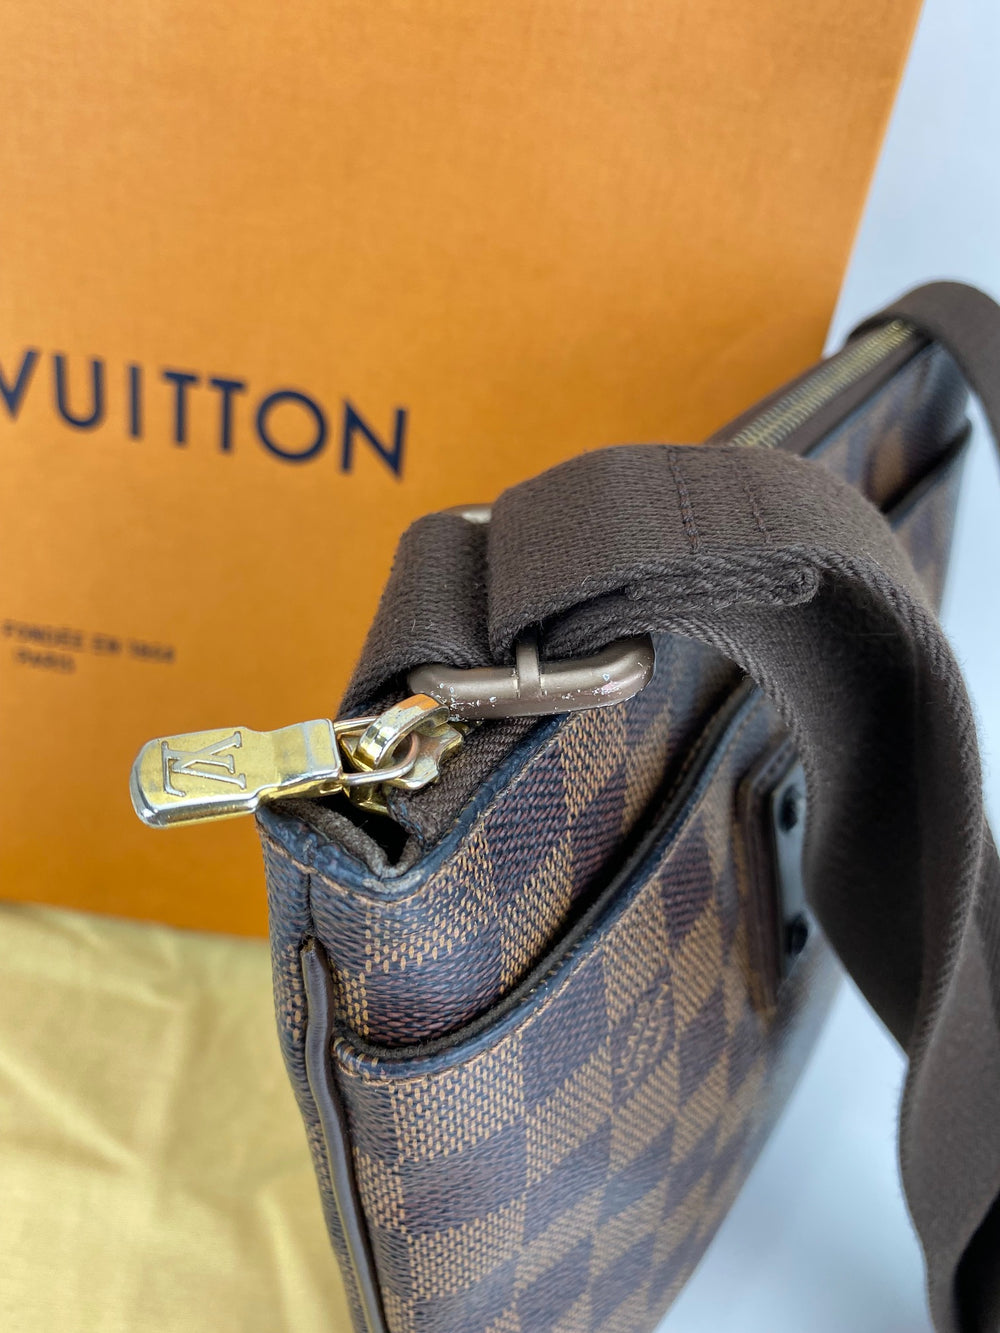 Used Louis Vuitton Bags & Pre Owned Louis Vuitton Bags